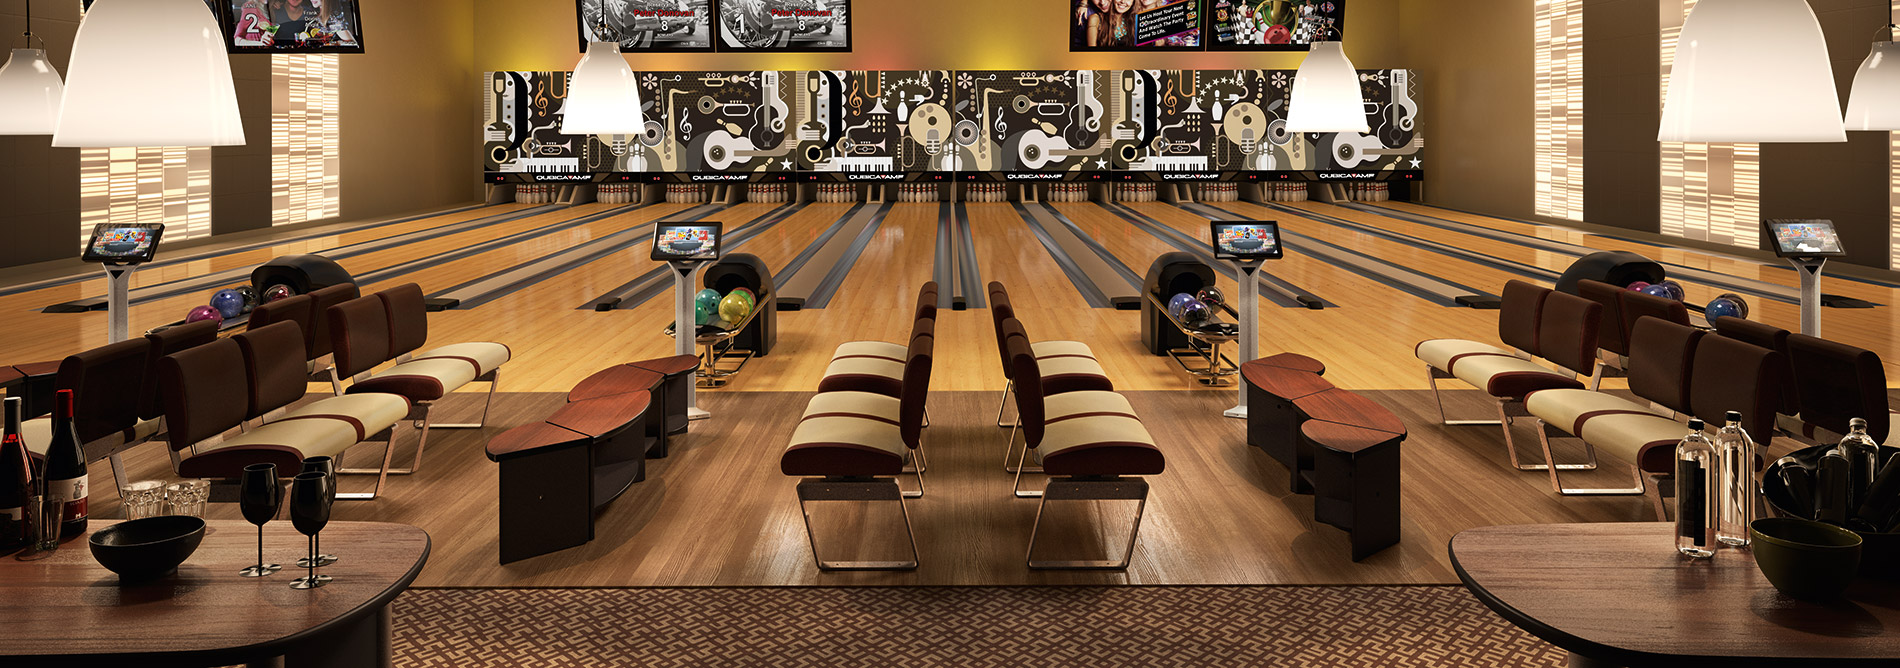 Bowling-QubicaAMF-furniture-harmony-synergy-banner2.jpg